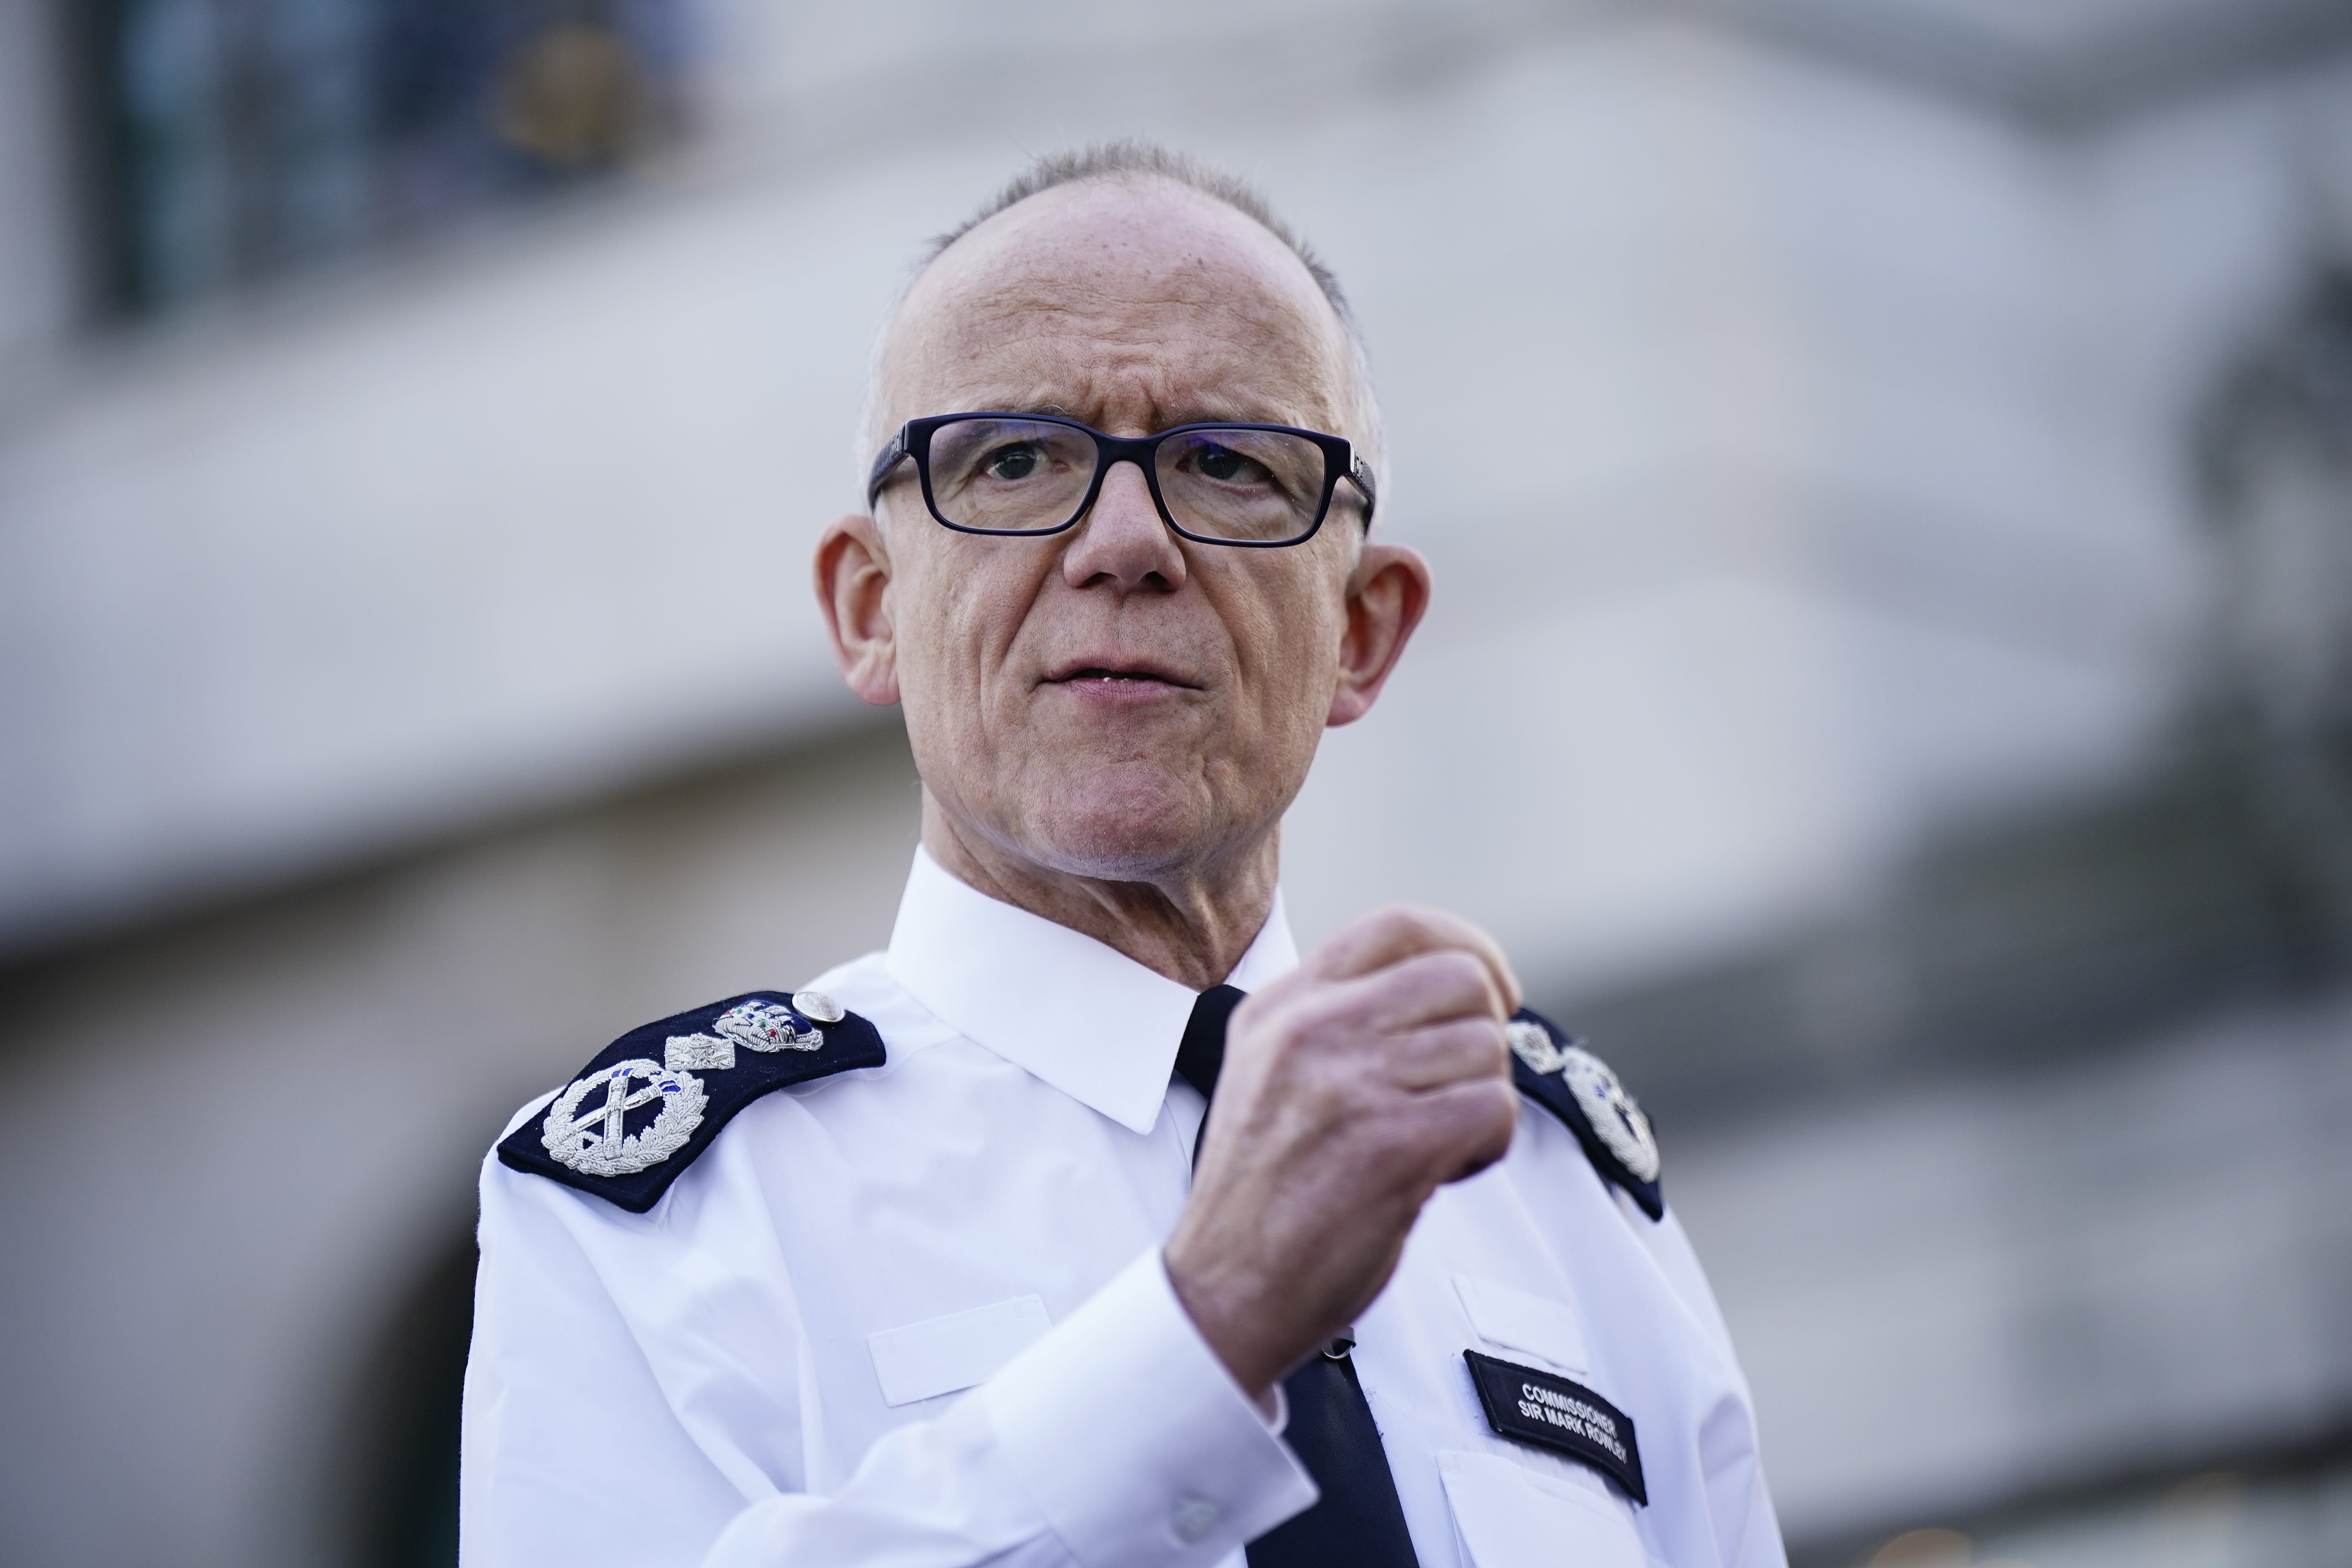 Metropolitan Police Commissioner Sir Mark Rowley was previously the head of the UK’s counterterrorism policing unit